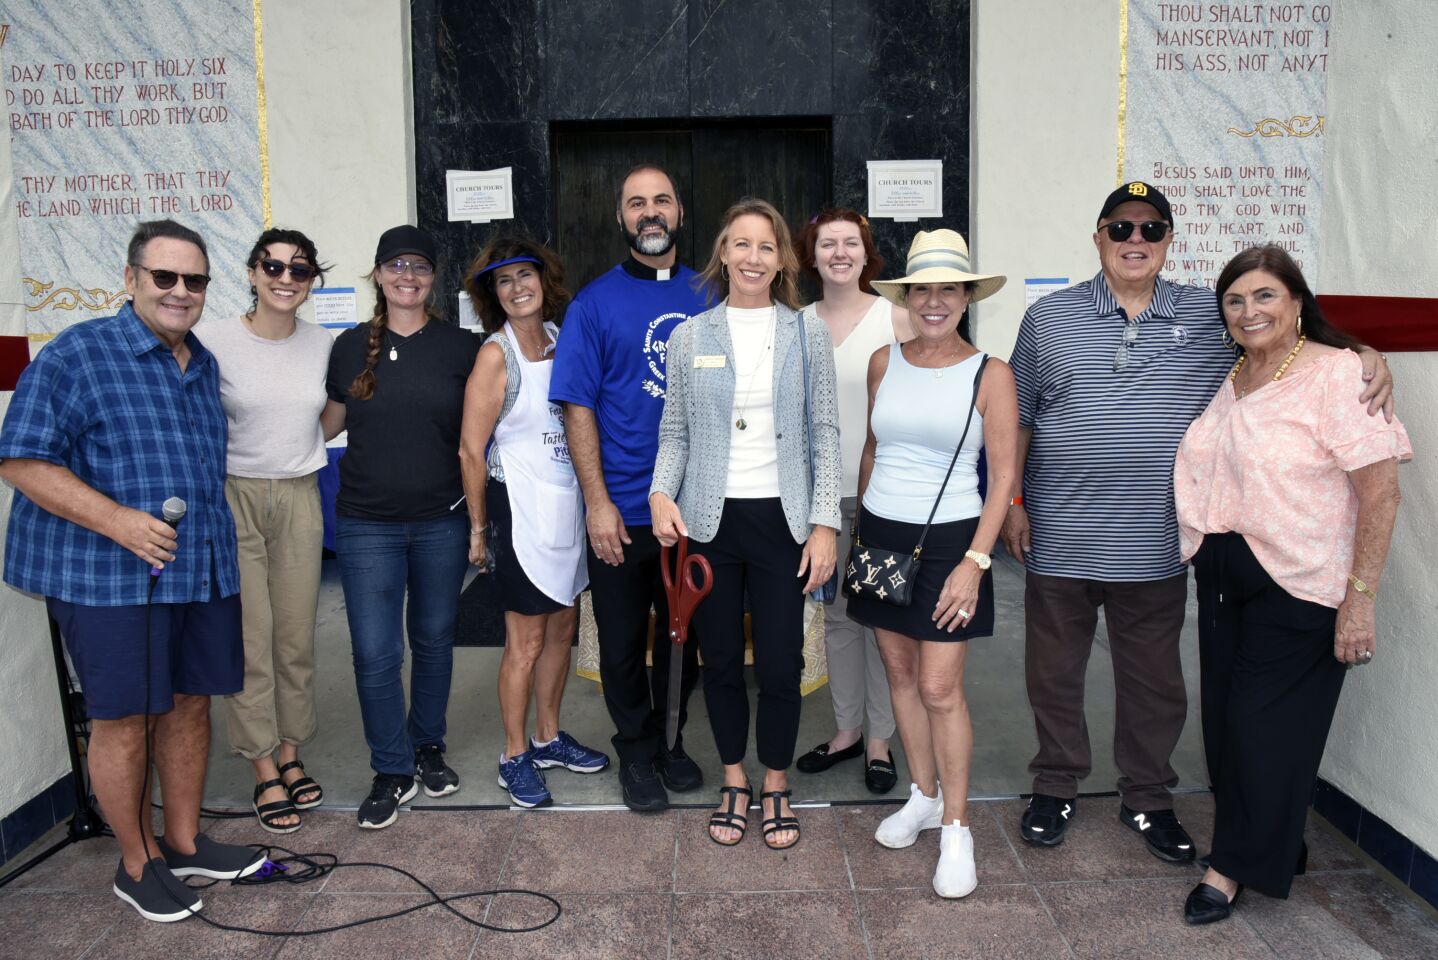 Encinitas Mayor Catherine Blakespear and Saints Constantine and Helen Greek Orthodox Church Reverend Father Angelo Maginas are joined by supporters at the ribbon cutting to celebrate the return of the Cardiff Greek Festival